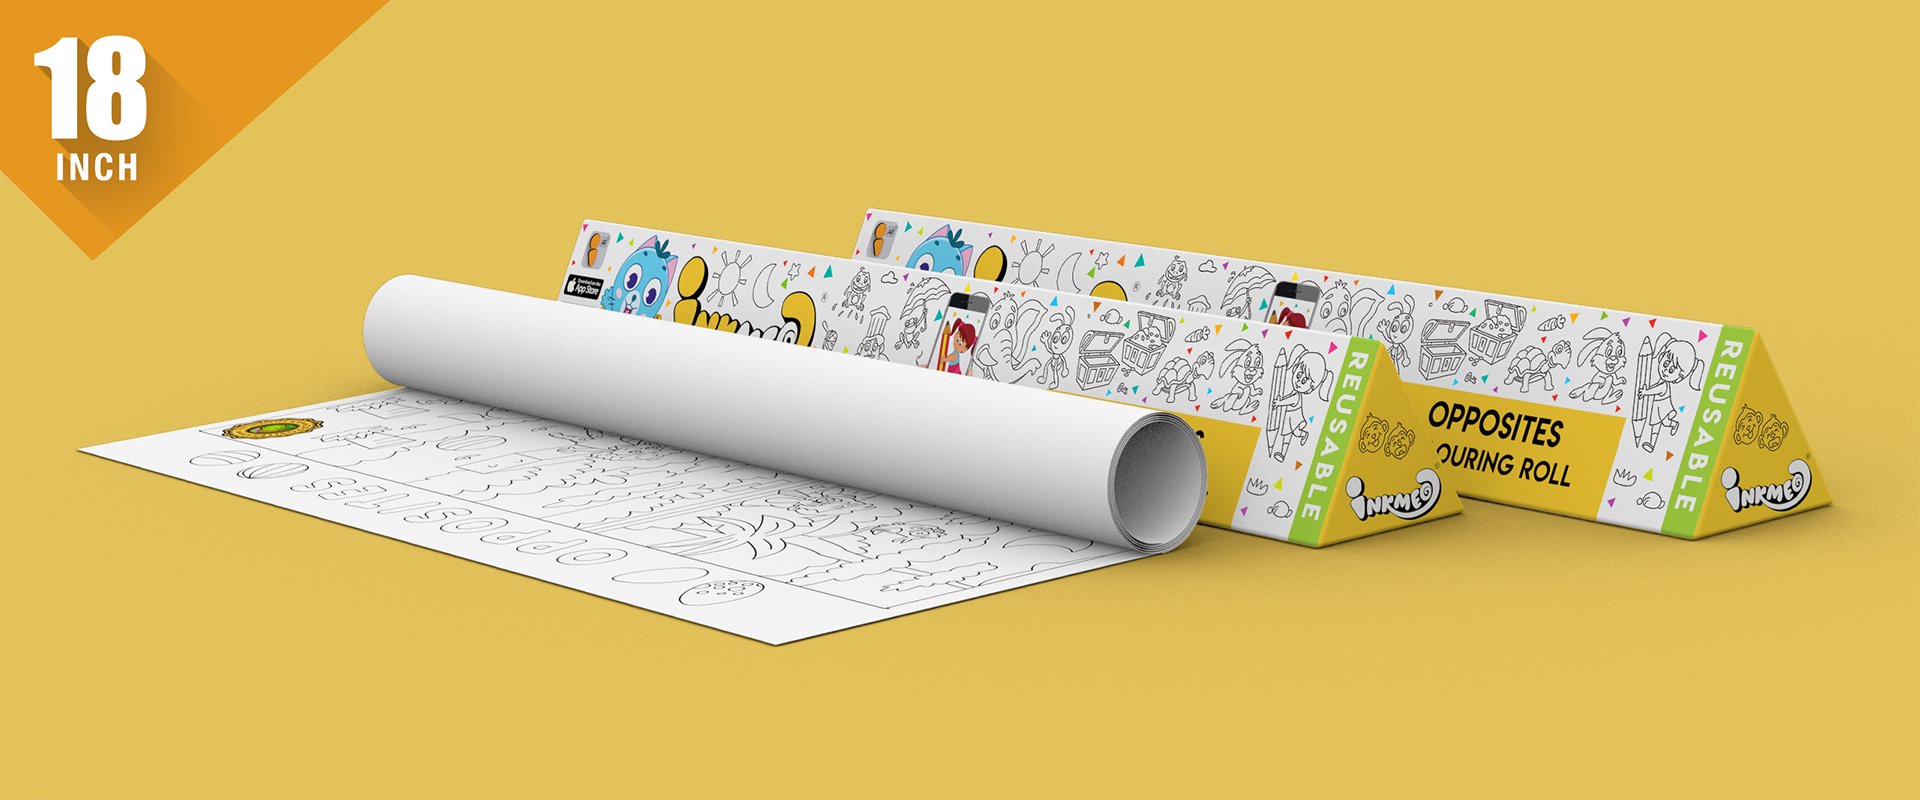 The image shows a yellowbackground with two triangular boxes, one of which has paper rolled out.